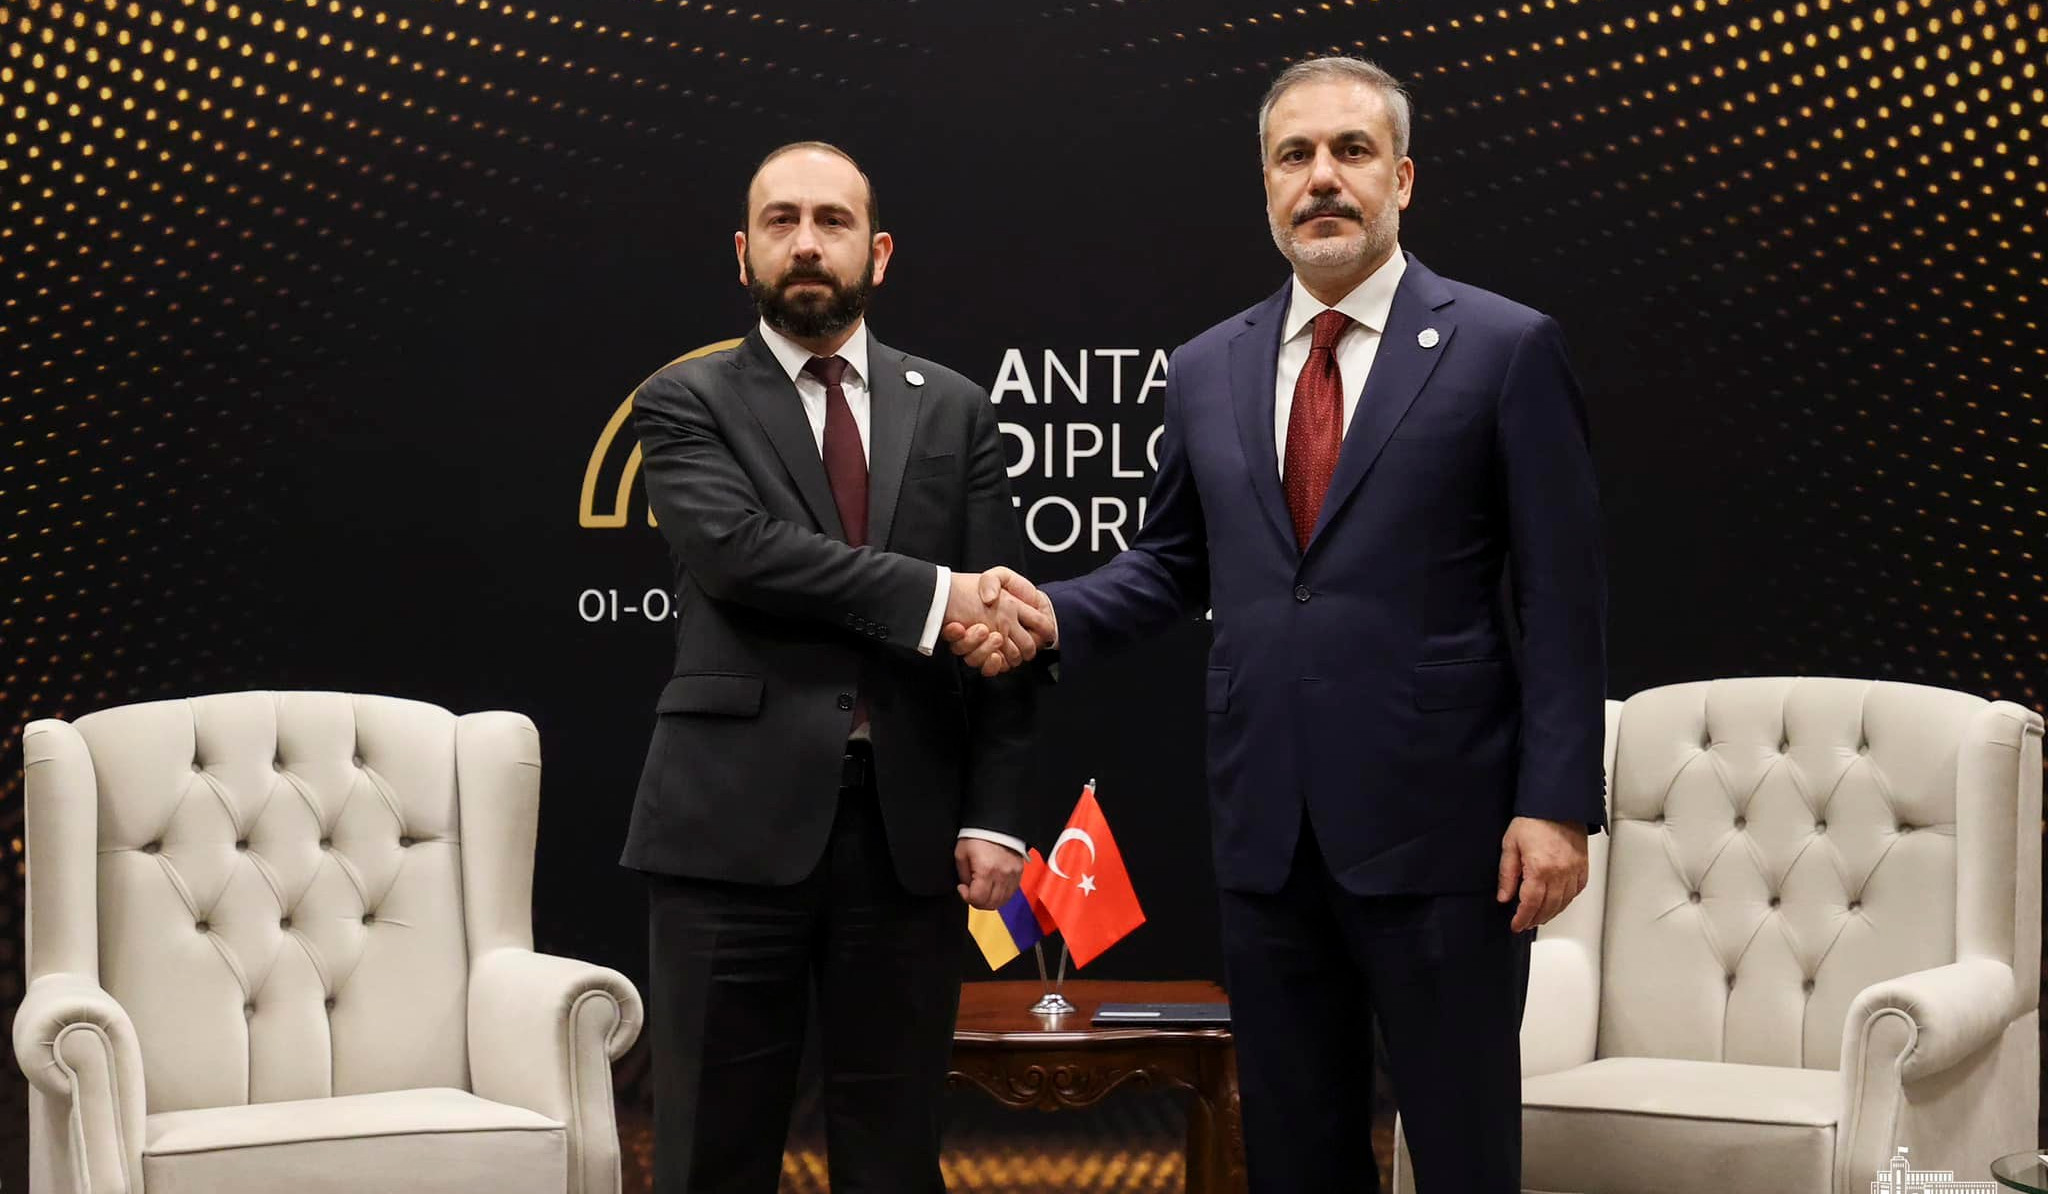 Meeting of Ministers of Foreign Affairs of Armenia and Türkiye